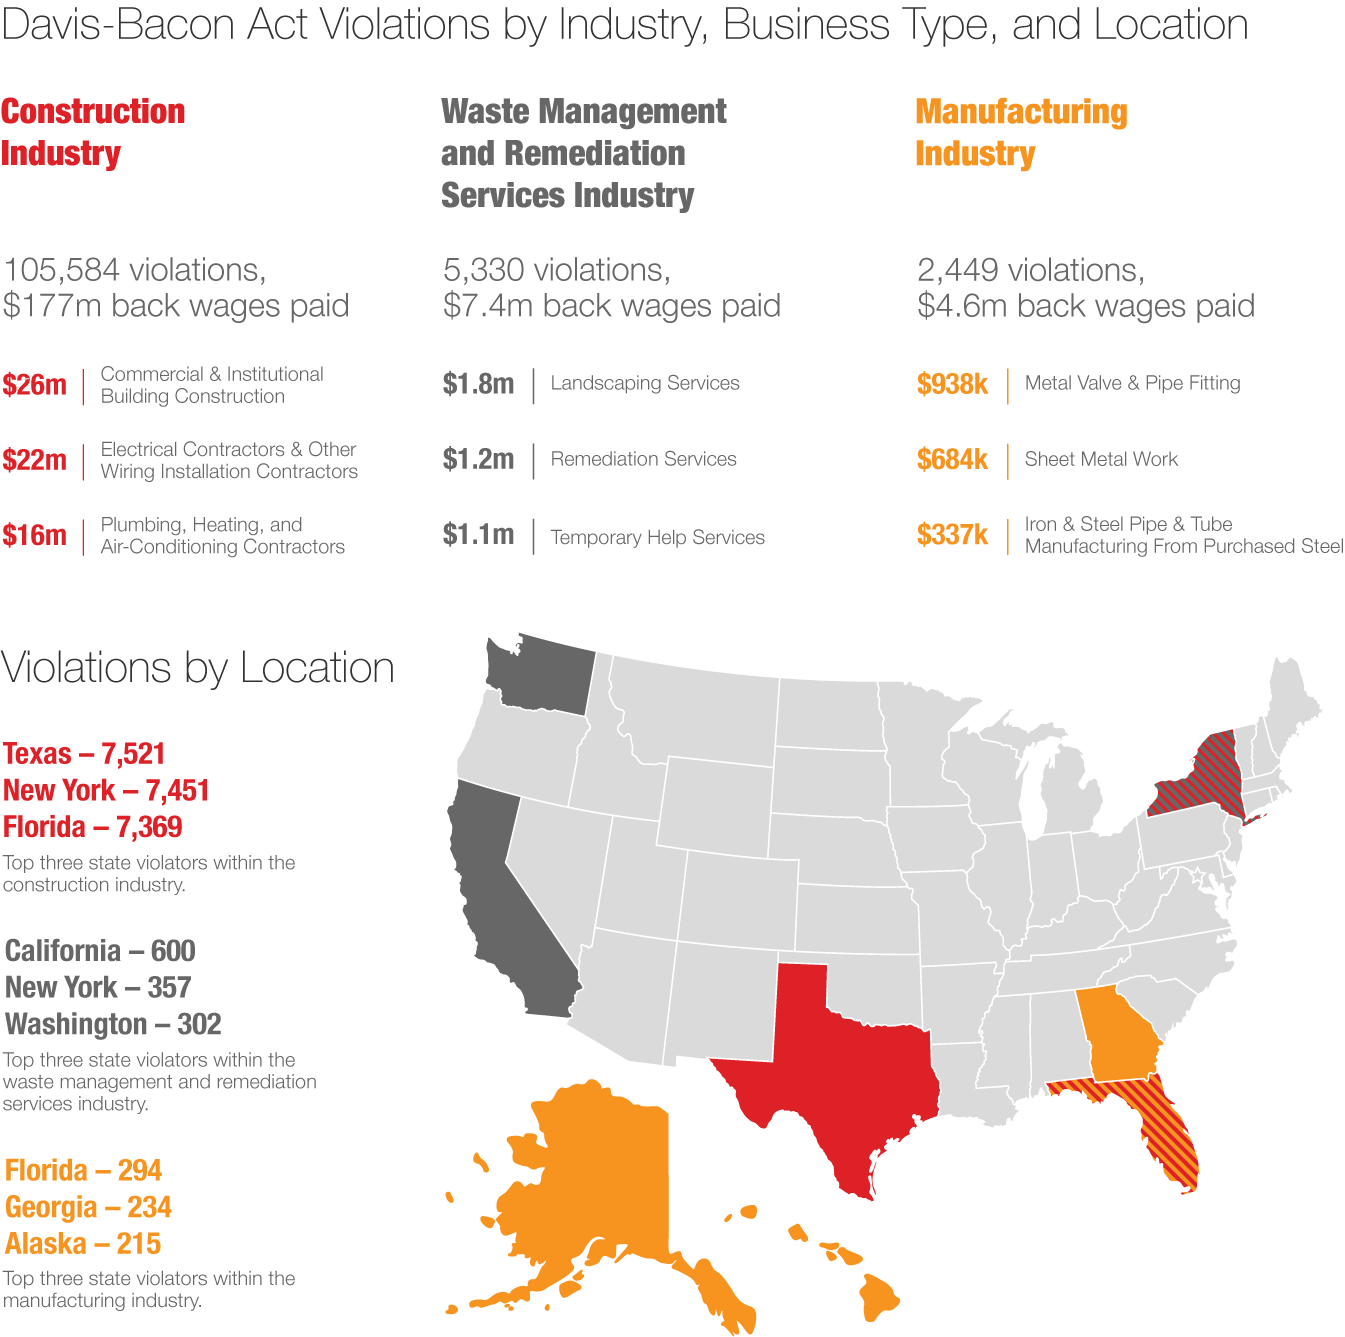 Davis-Bacon Act violations listed by industry, location, and business type infographic.